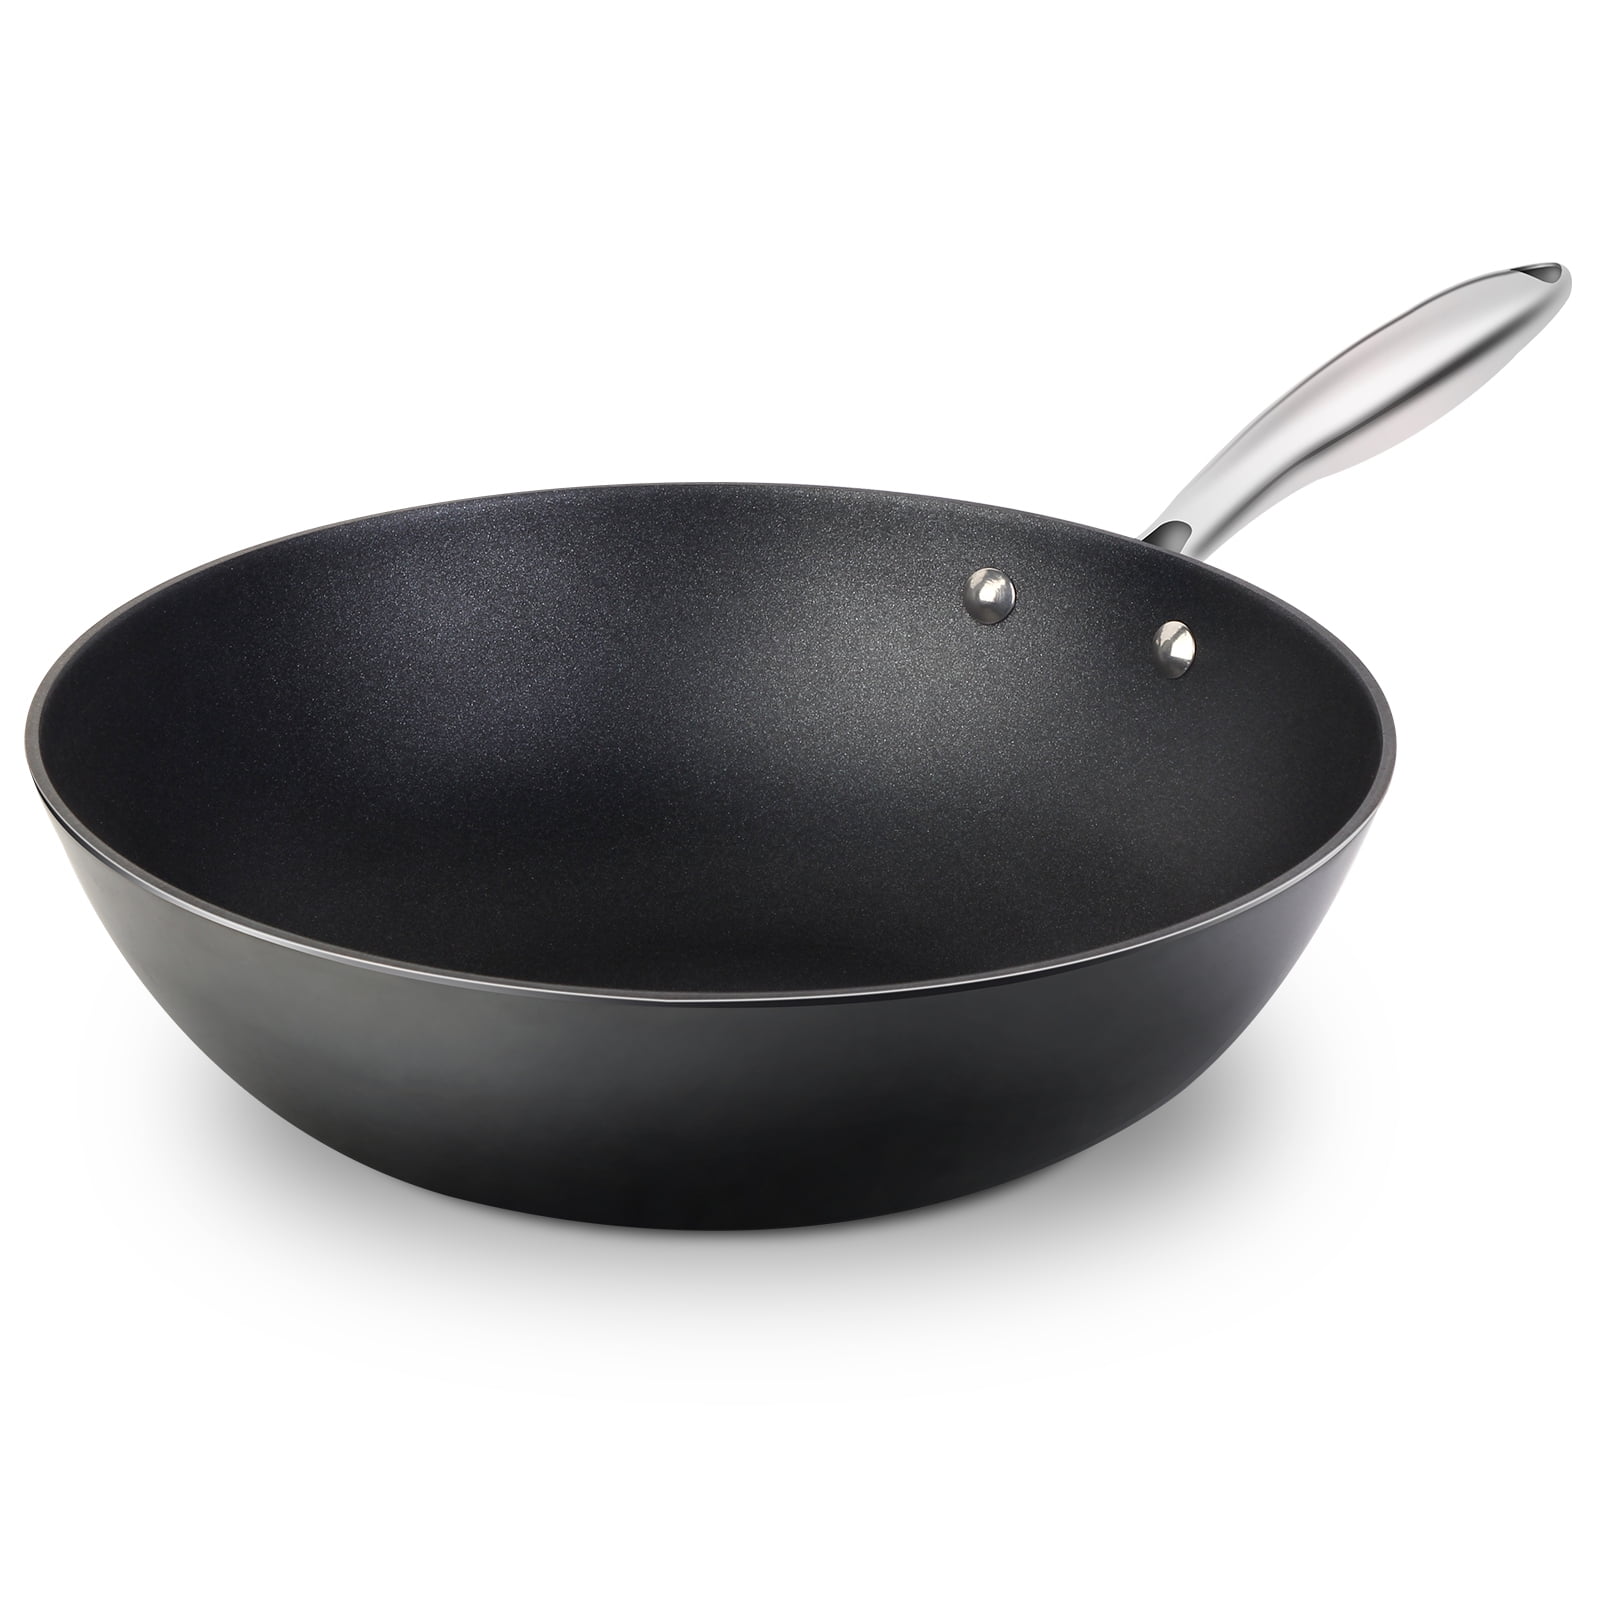 IMUSA IMUSA Pre-seasoned PTFE Nonstick Light Cast Iron Wok with Soft Touch  Woodlook Handle 14 Inches, Black - IMUSA